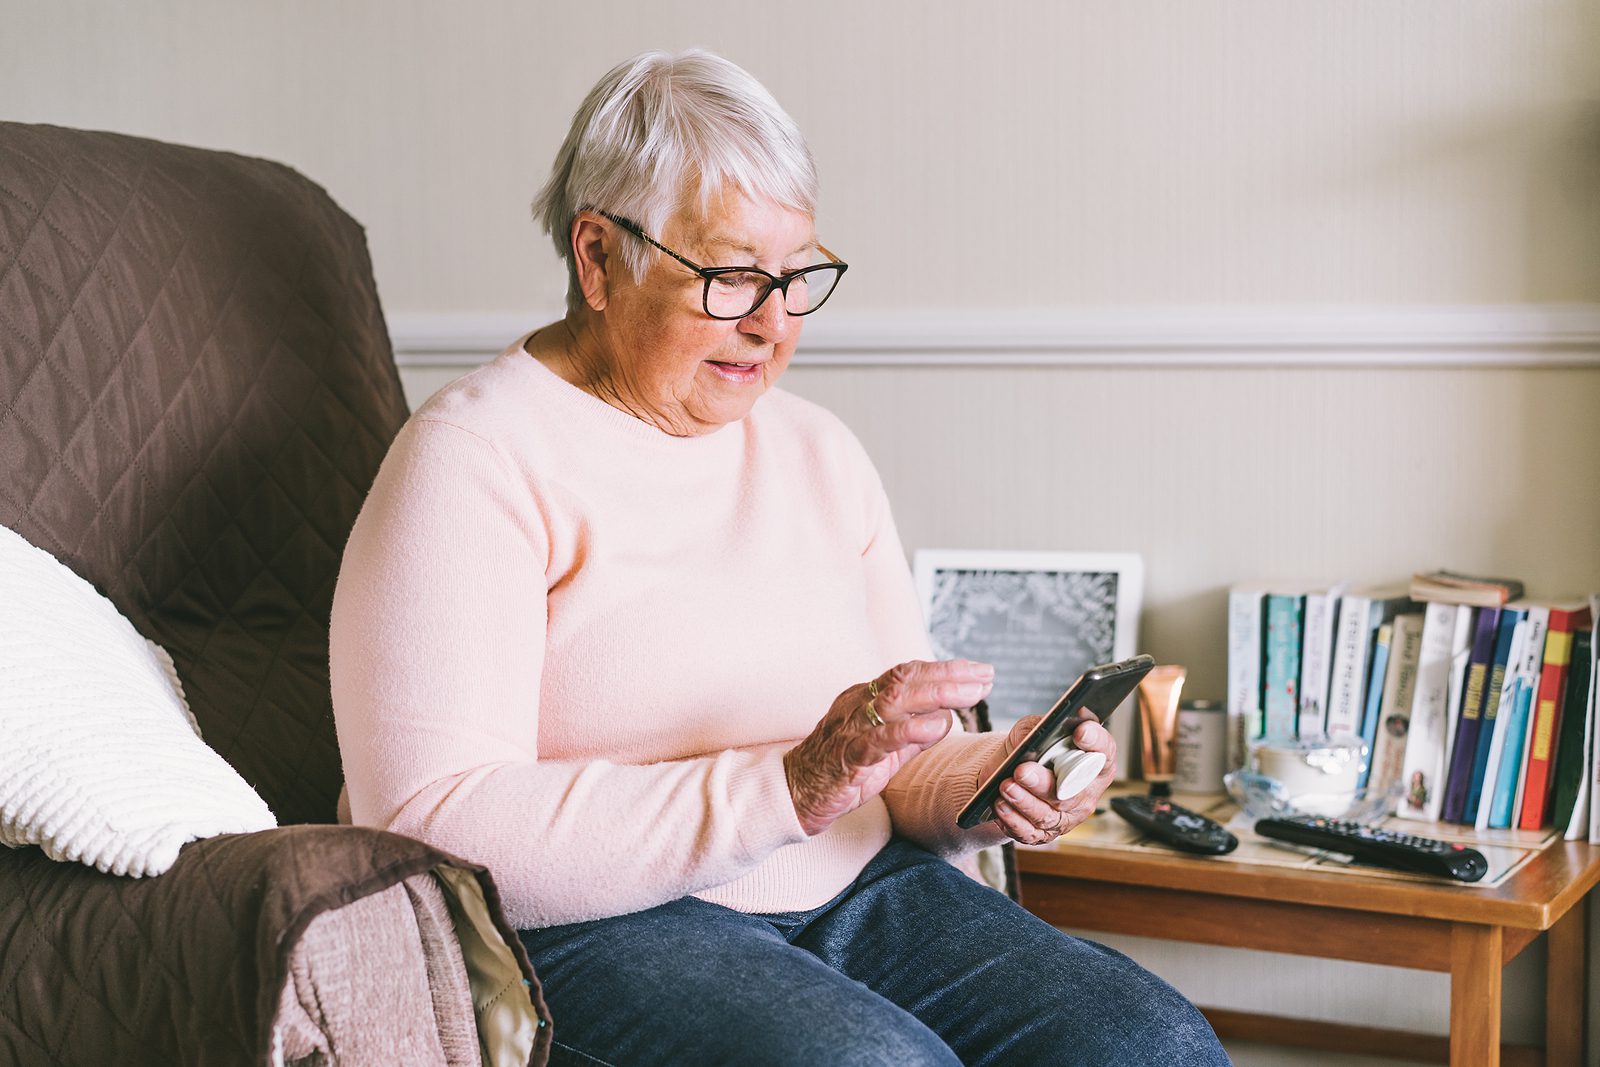 Senior woman using smartphone sitting on armchair at home. Relaxed mature older lady holding mobile phone texting, buying online, playing games, checking apps on cellphone. Seniors and technology